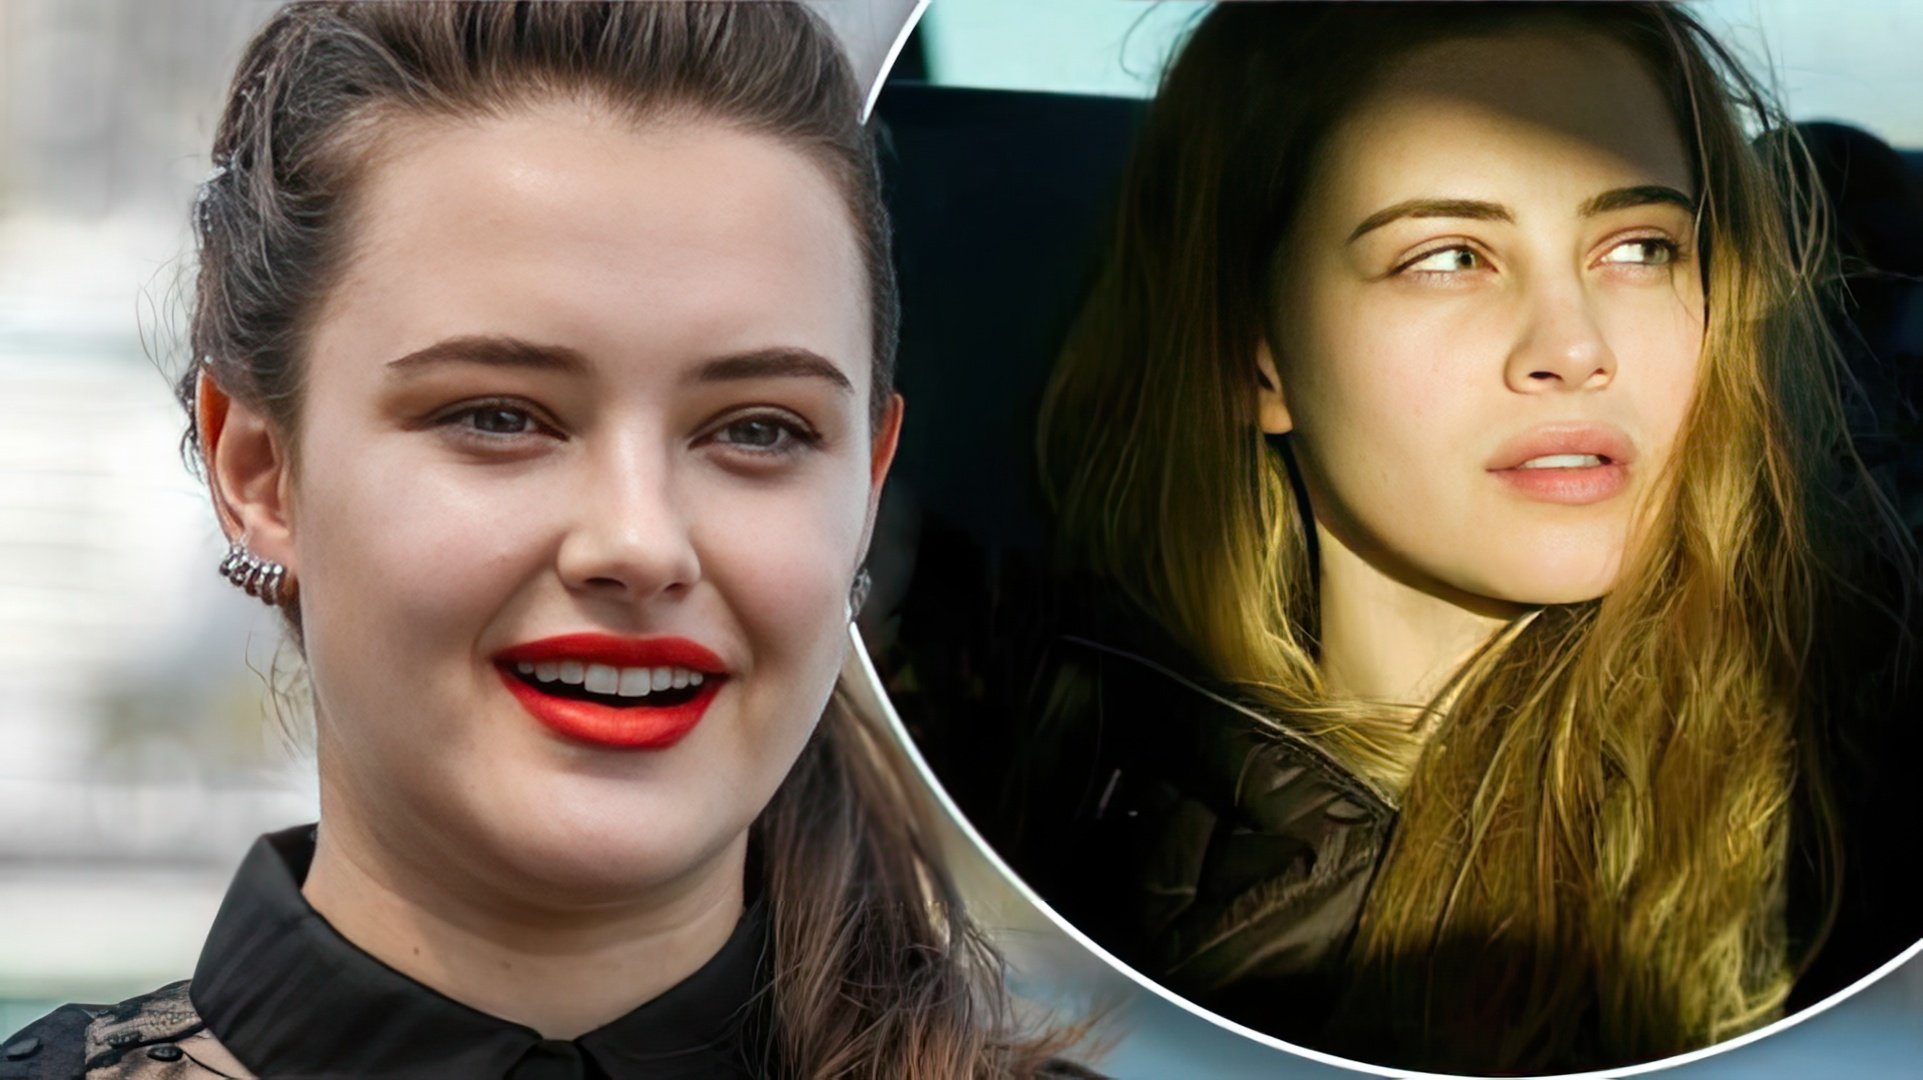 Katherine Langford and Josephine Langford are sisters